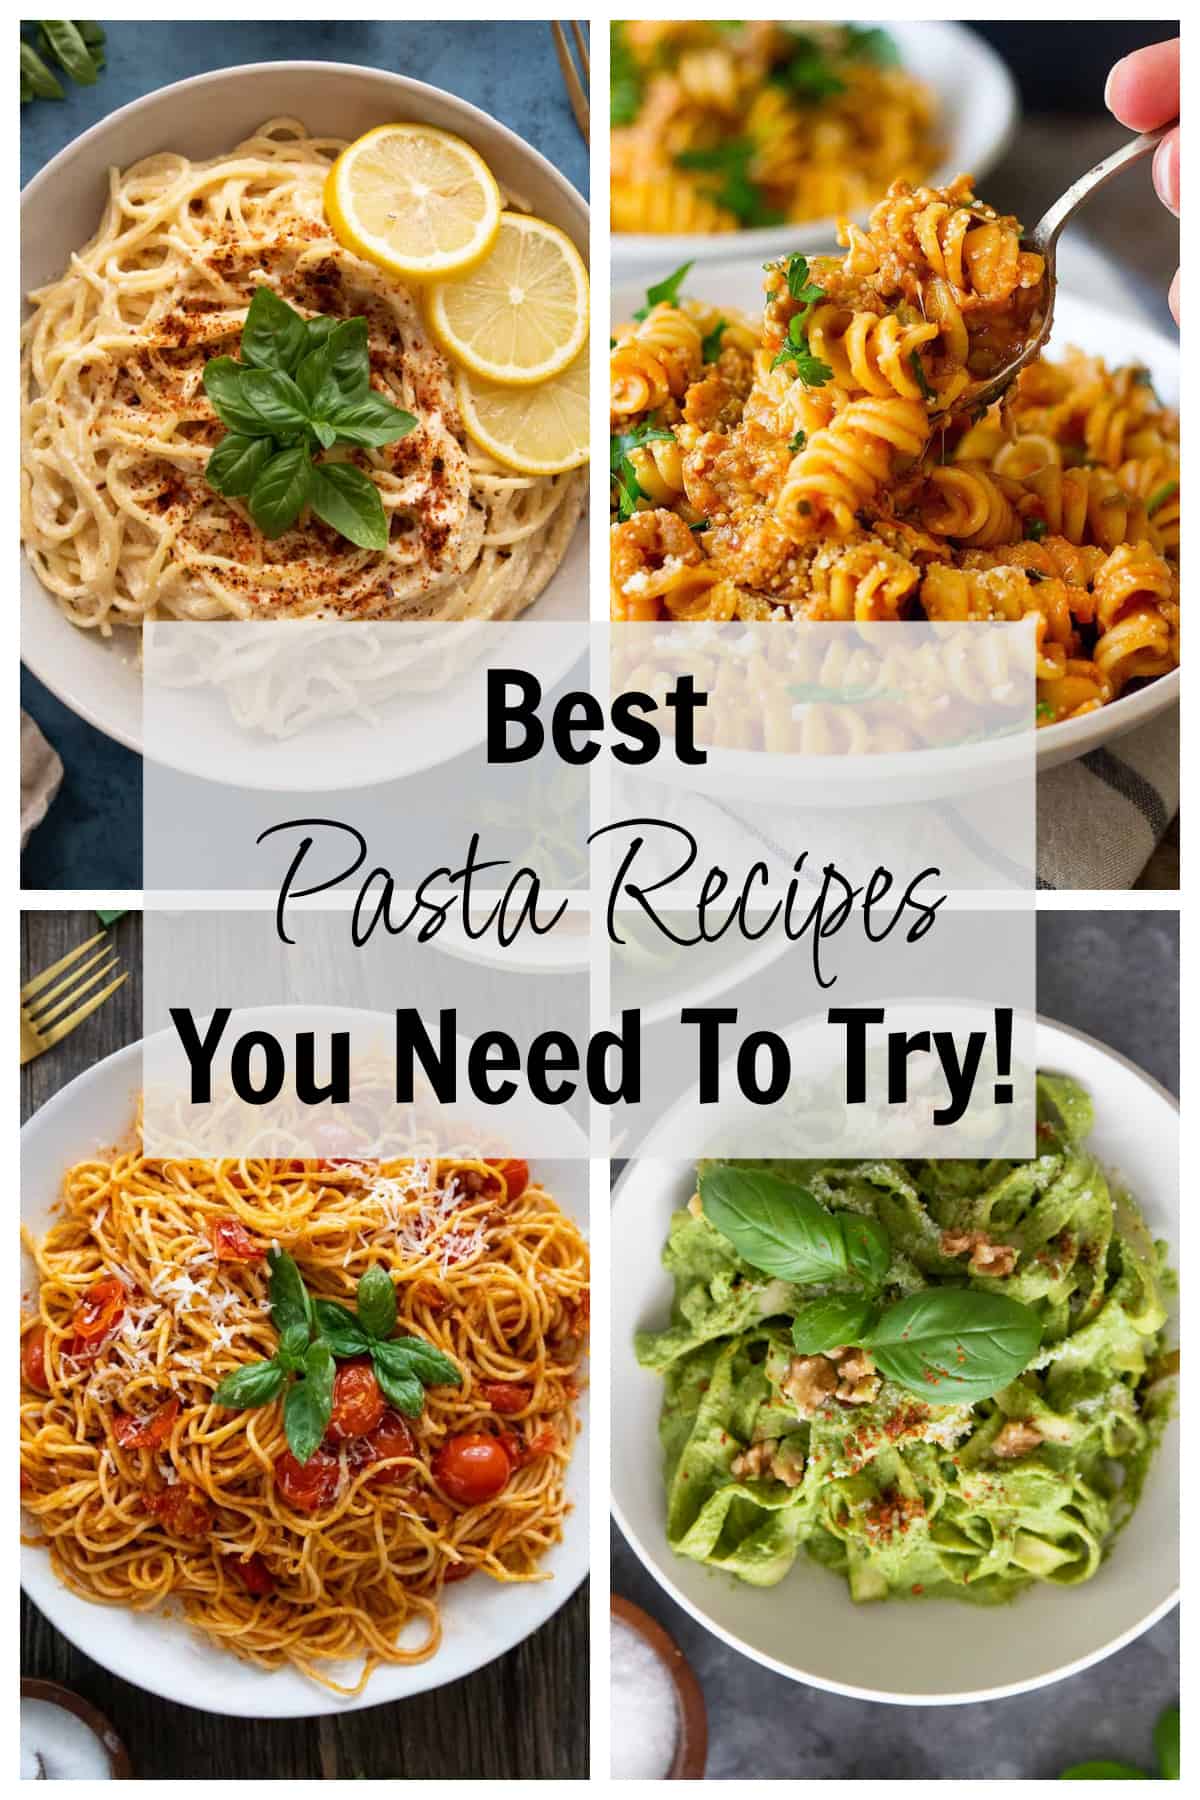 Looking for simple and delicious pasta recipes? You're in the right place. Check out our collection of easy pasta recipe made with real ingredients. We've got vegetarian pasta recipes as well as indulgent ones that'll make you come back for seconds. 